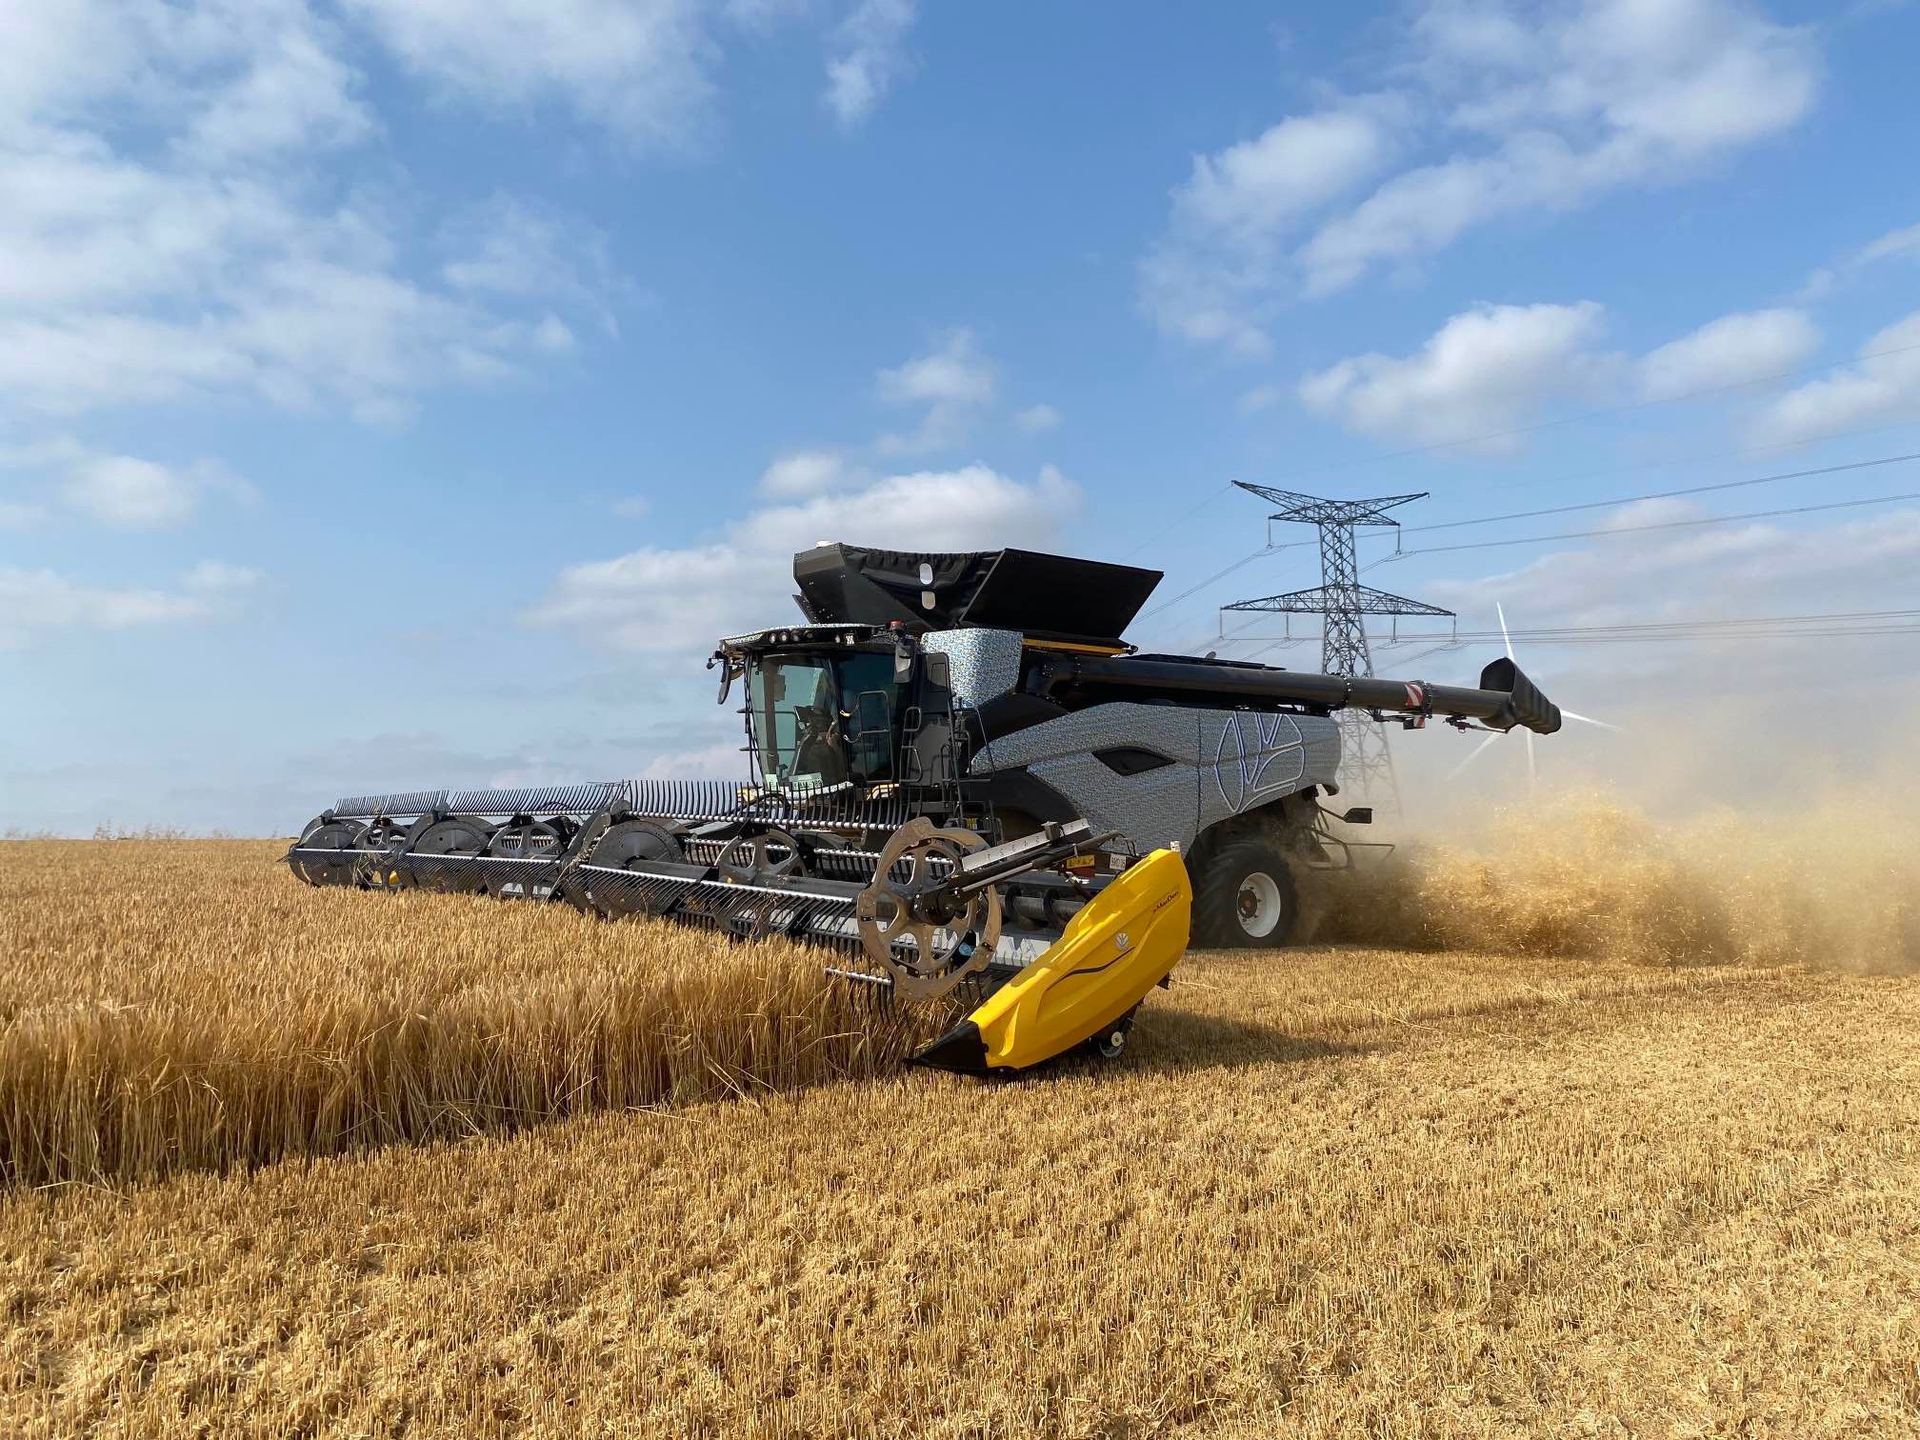 Only New Holland’s concept CR twin axial rotor combine harvester is the only innovation that met the gold standard.